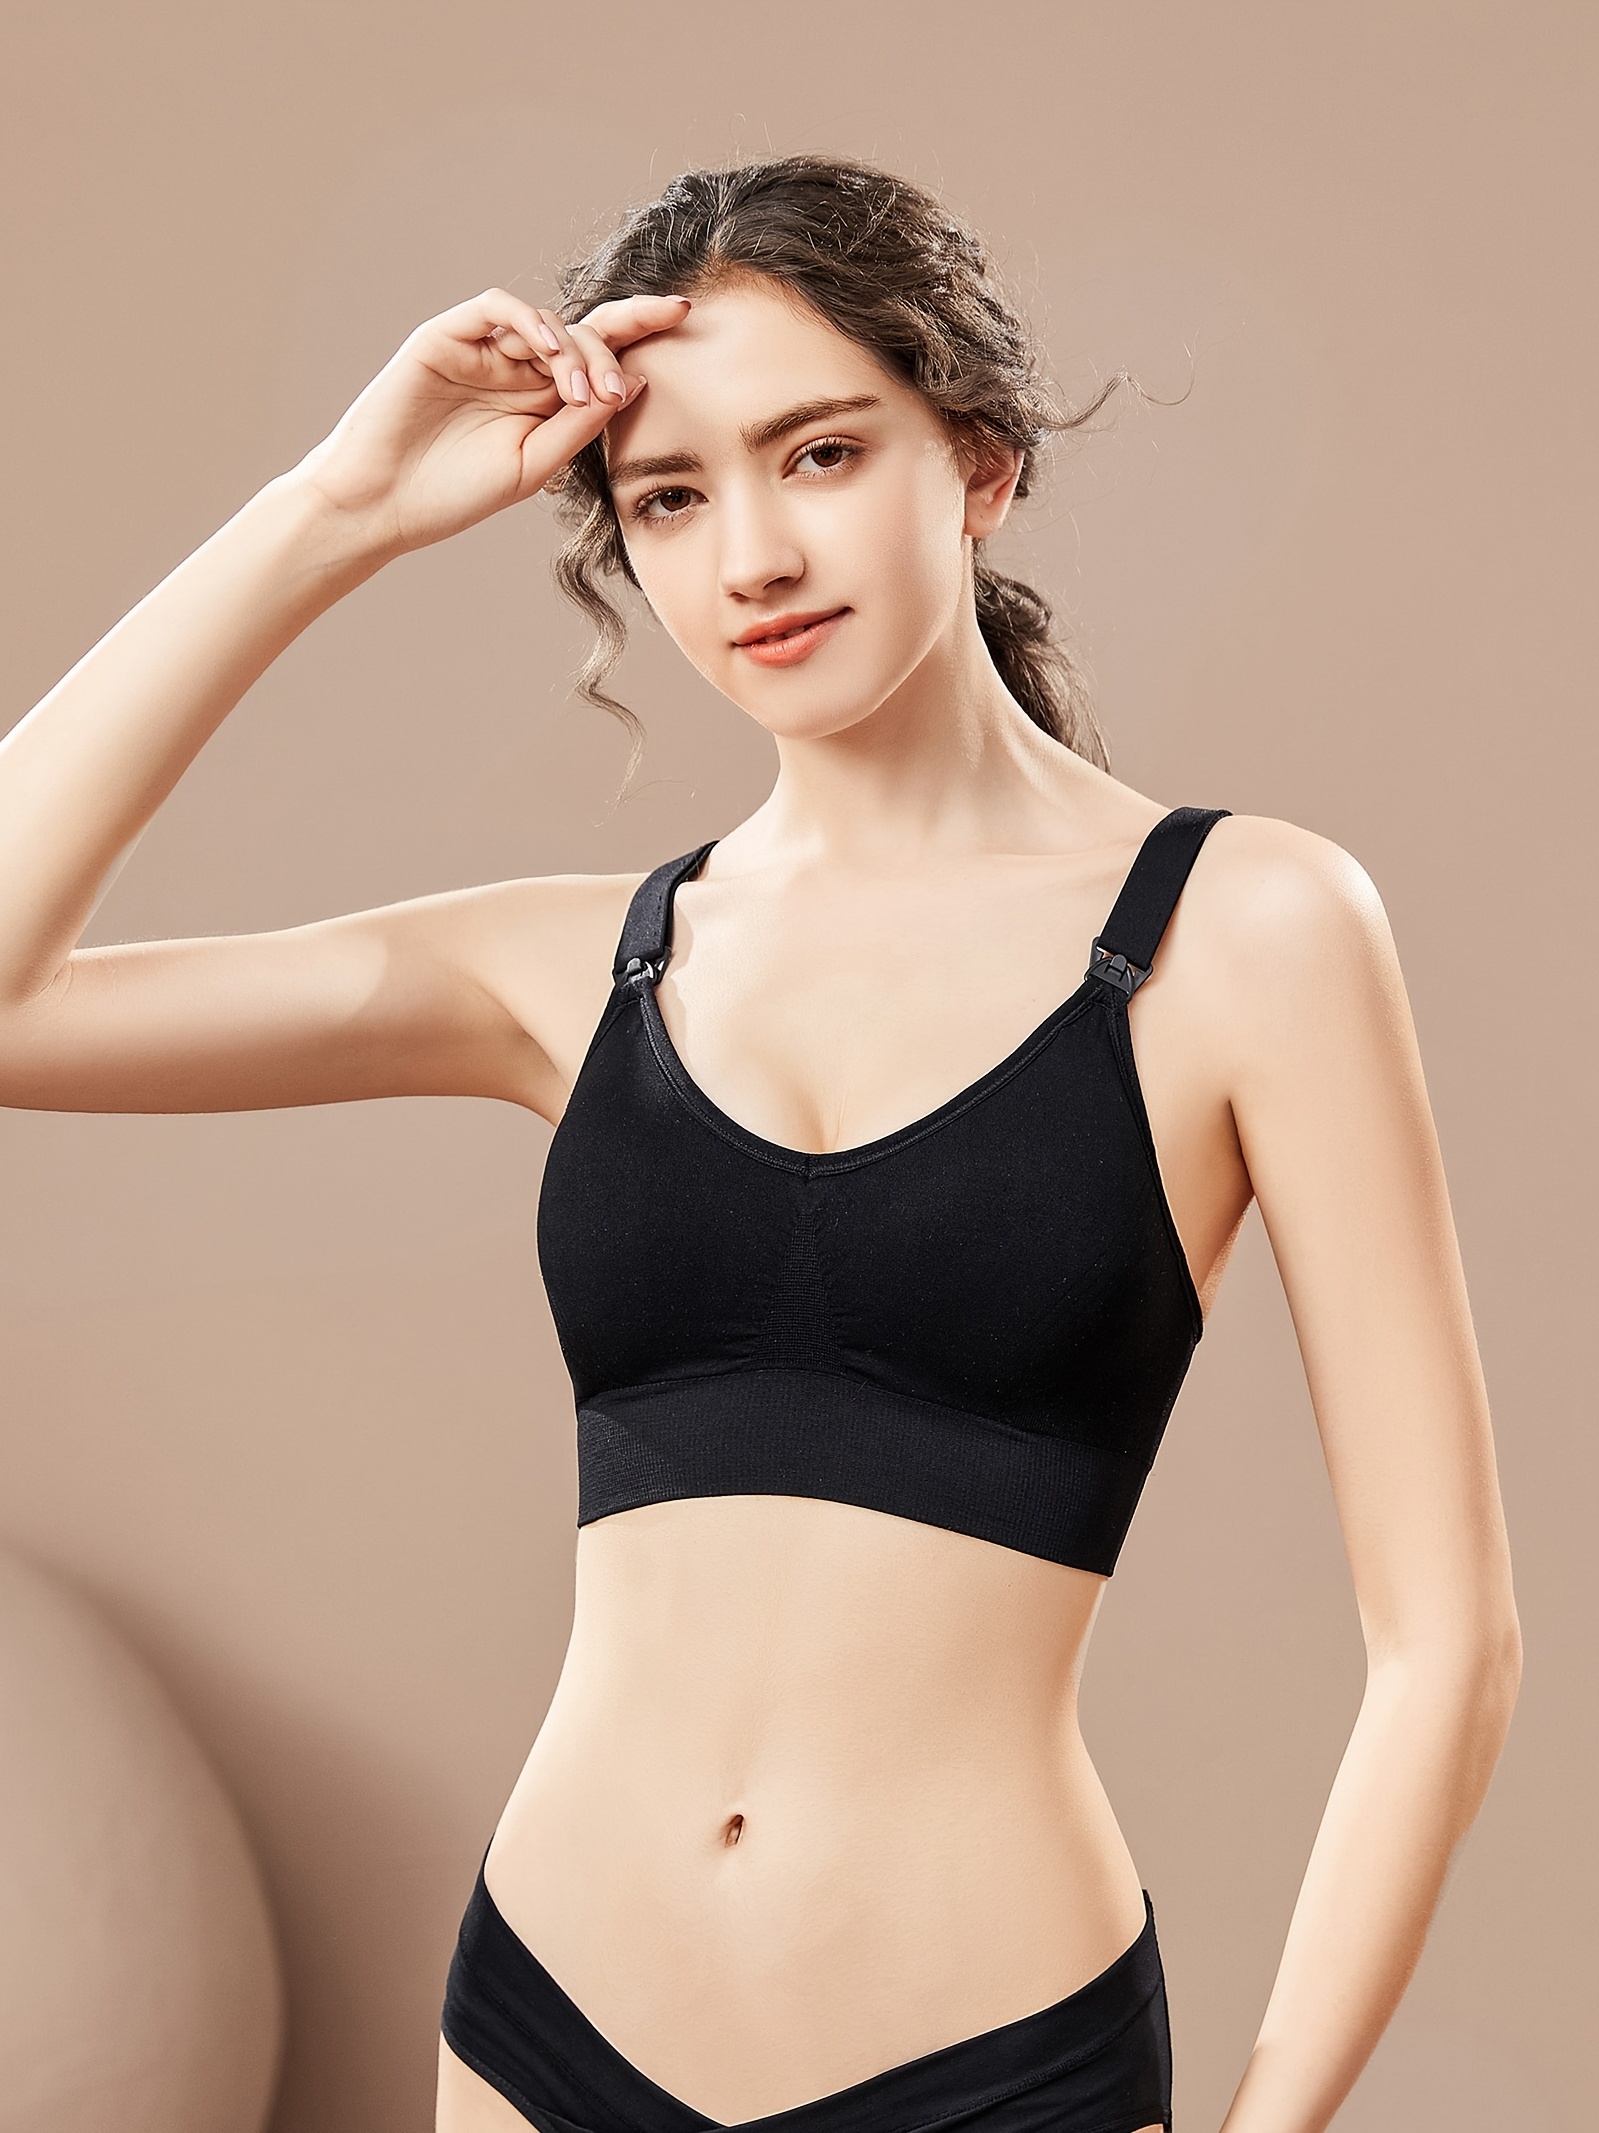 Oversized Bras for Women - Thin Lace Gathering Solid Color Soft